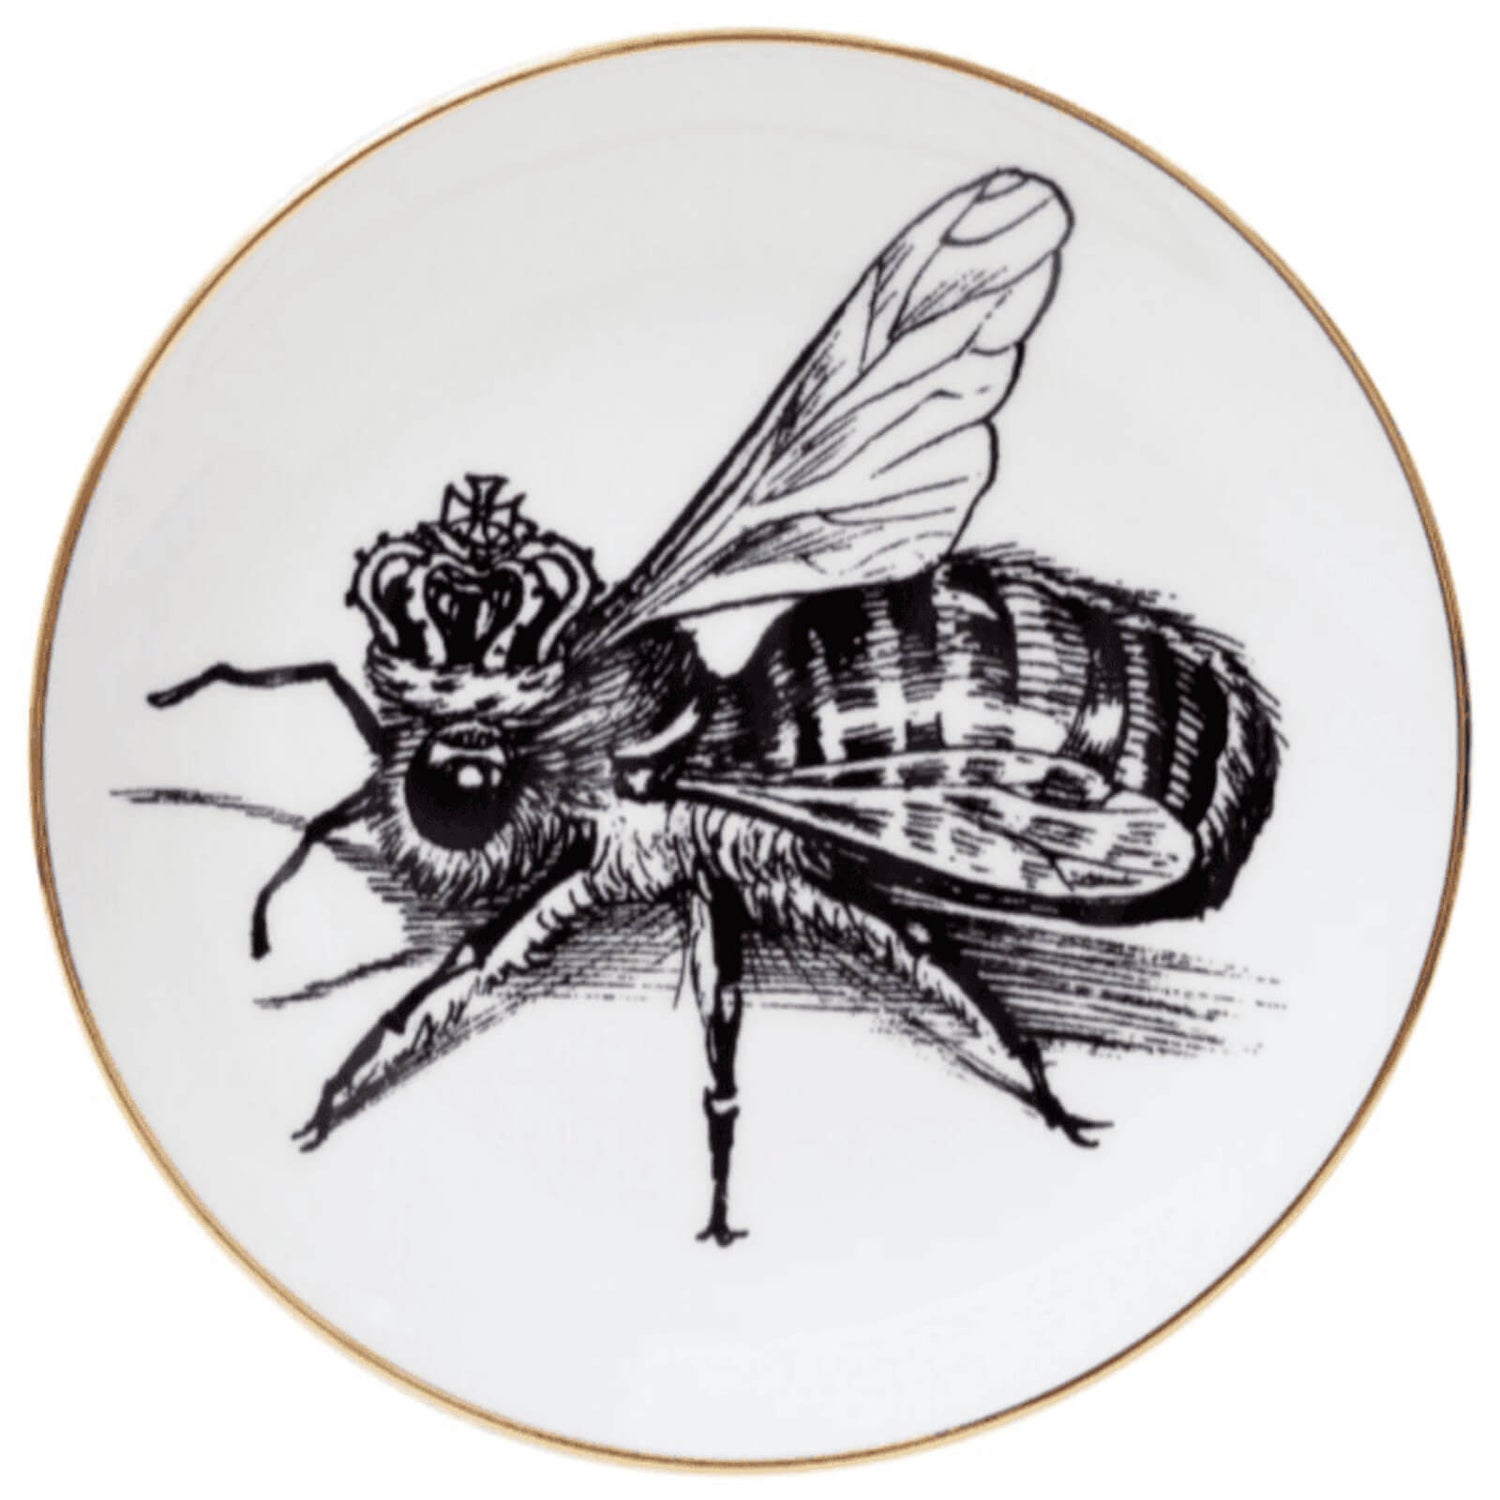 Rory Dobner Decorative Perfect Plate - Queen Bee - Medium